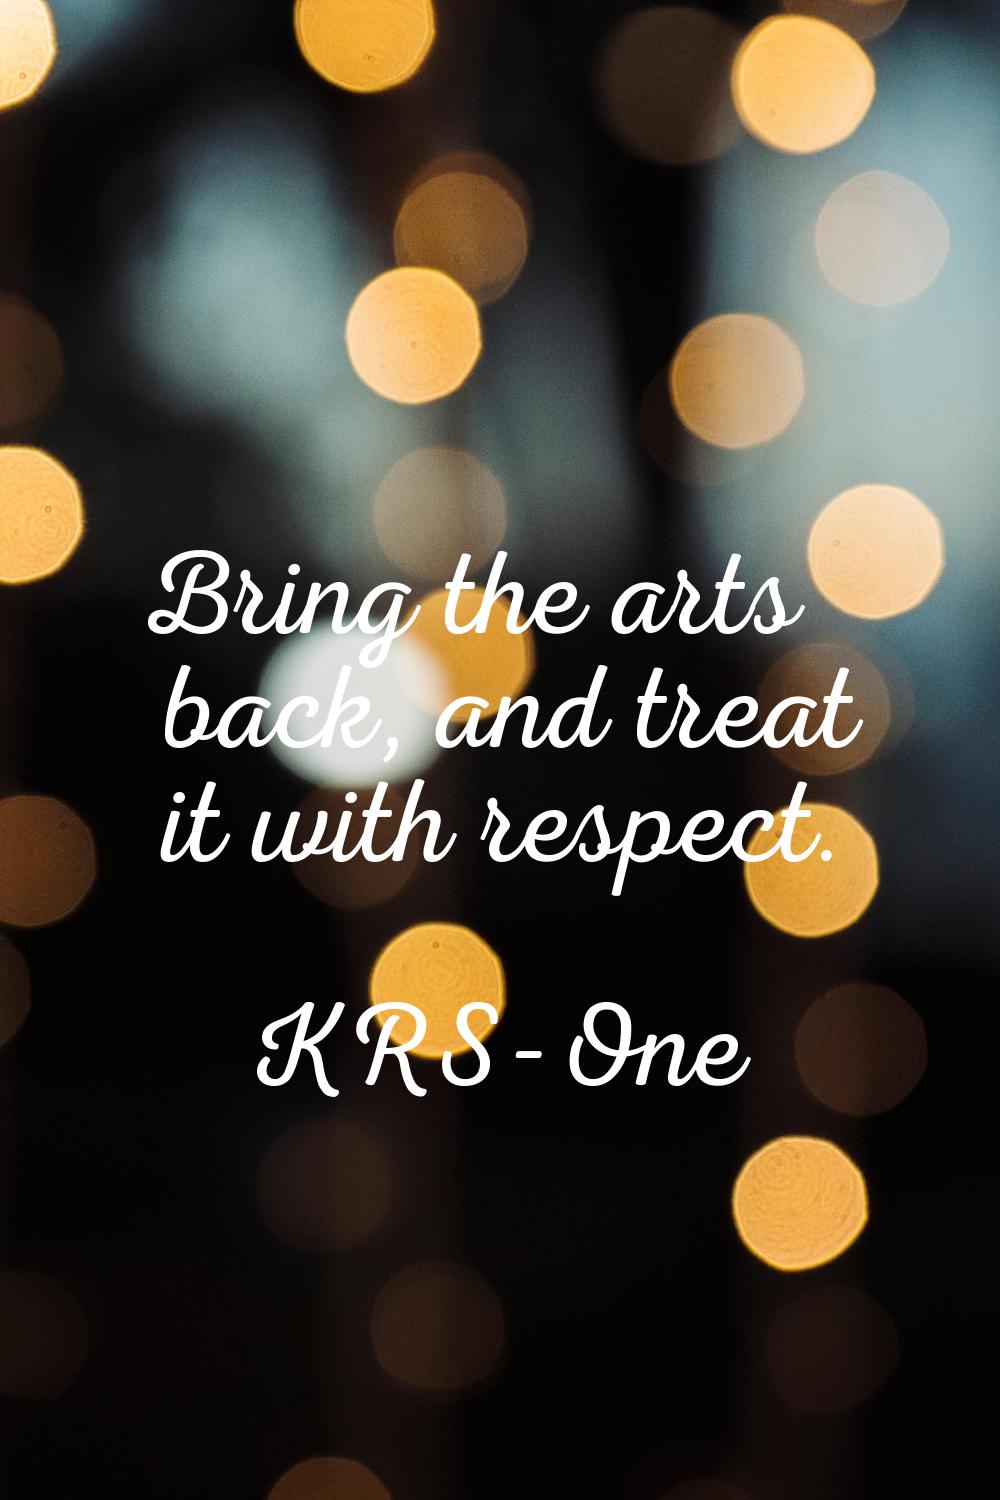 Bring the arts back, and treat it with respect.